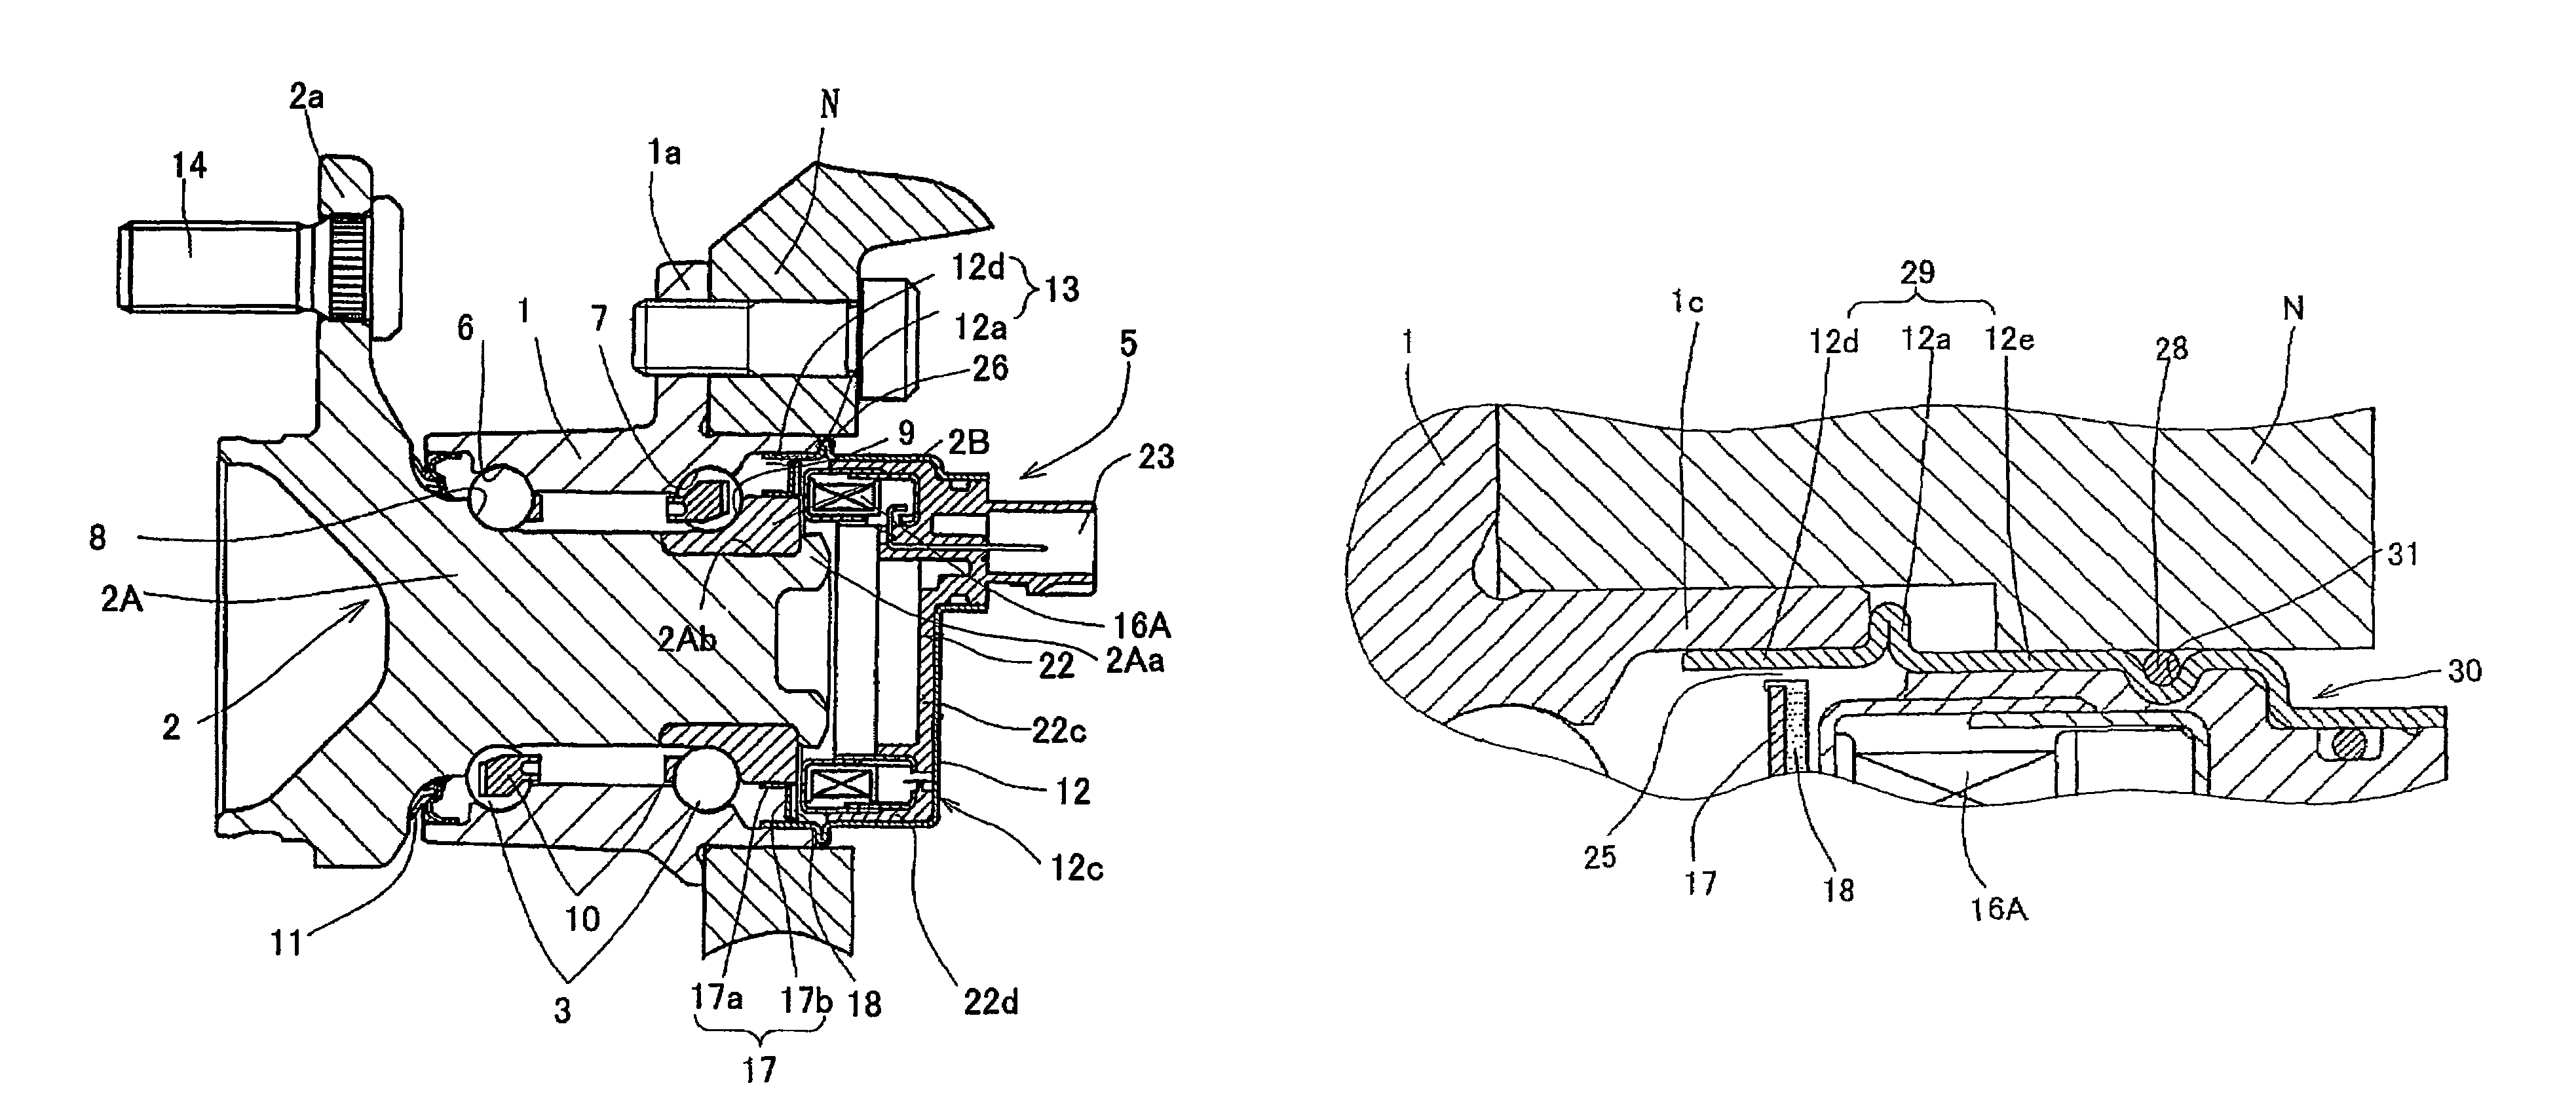 Bearing assembly having rotation sensor and mounting structure to support sensor cap and connector